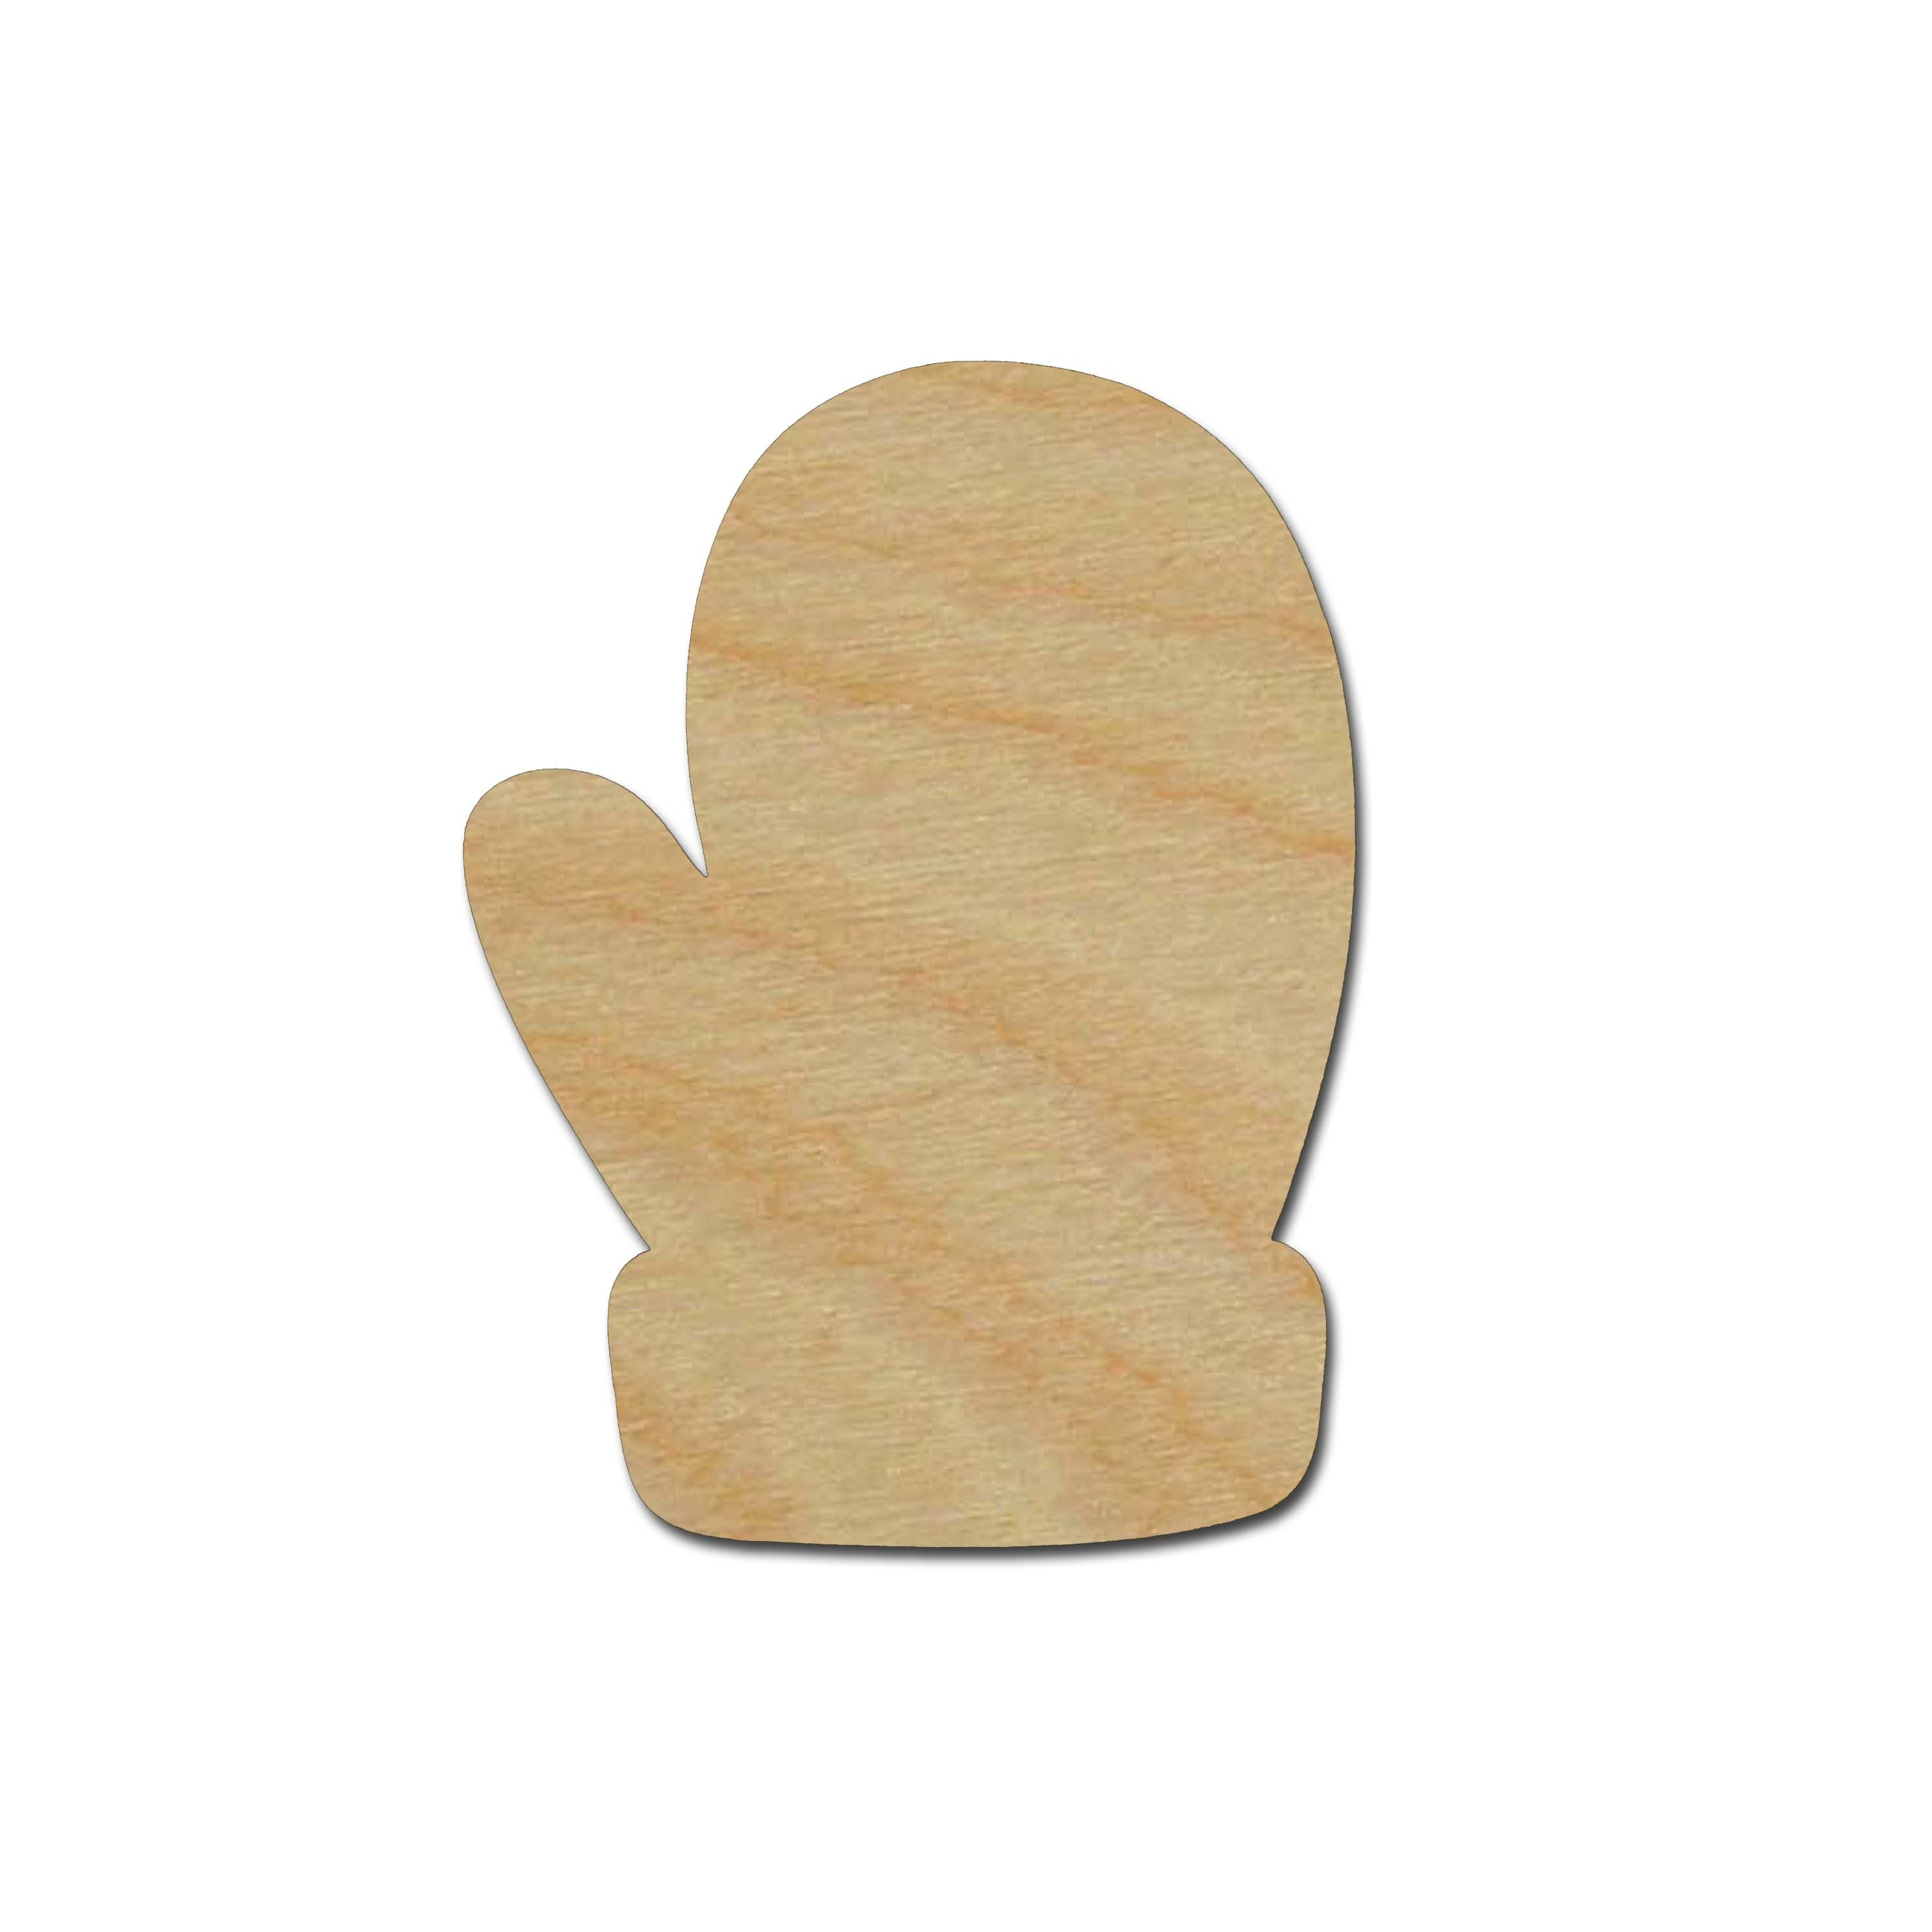 Wood Shapes, Wooden Cutouts, Unfinished Wood Shapes, Paintable Craft